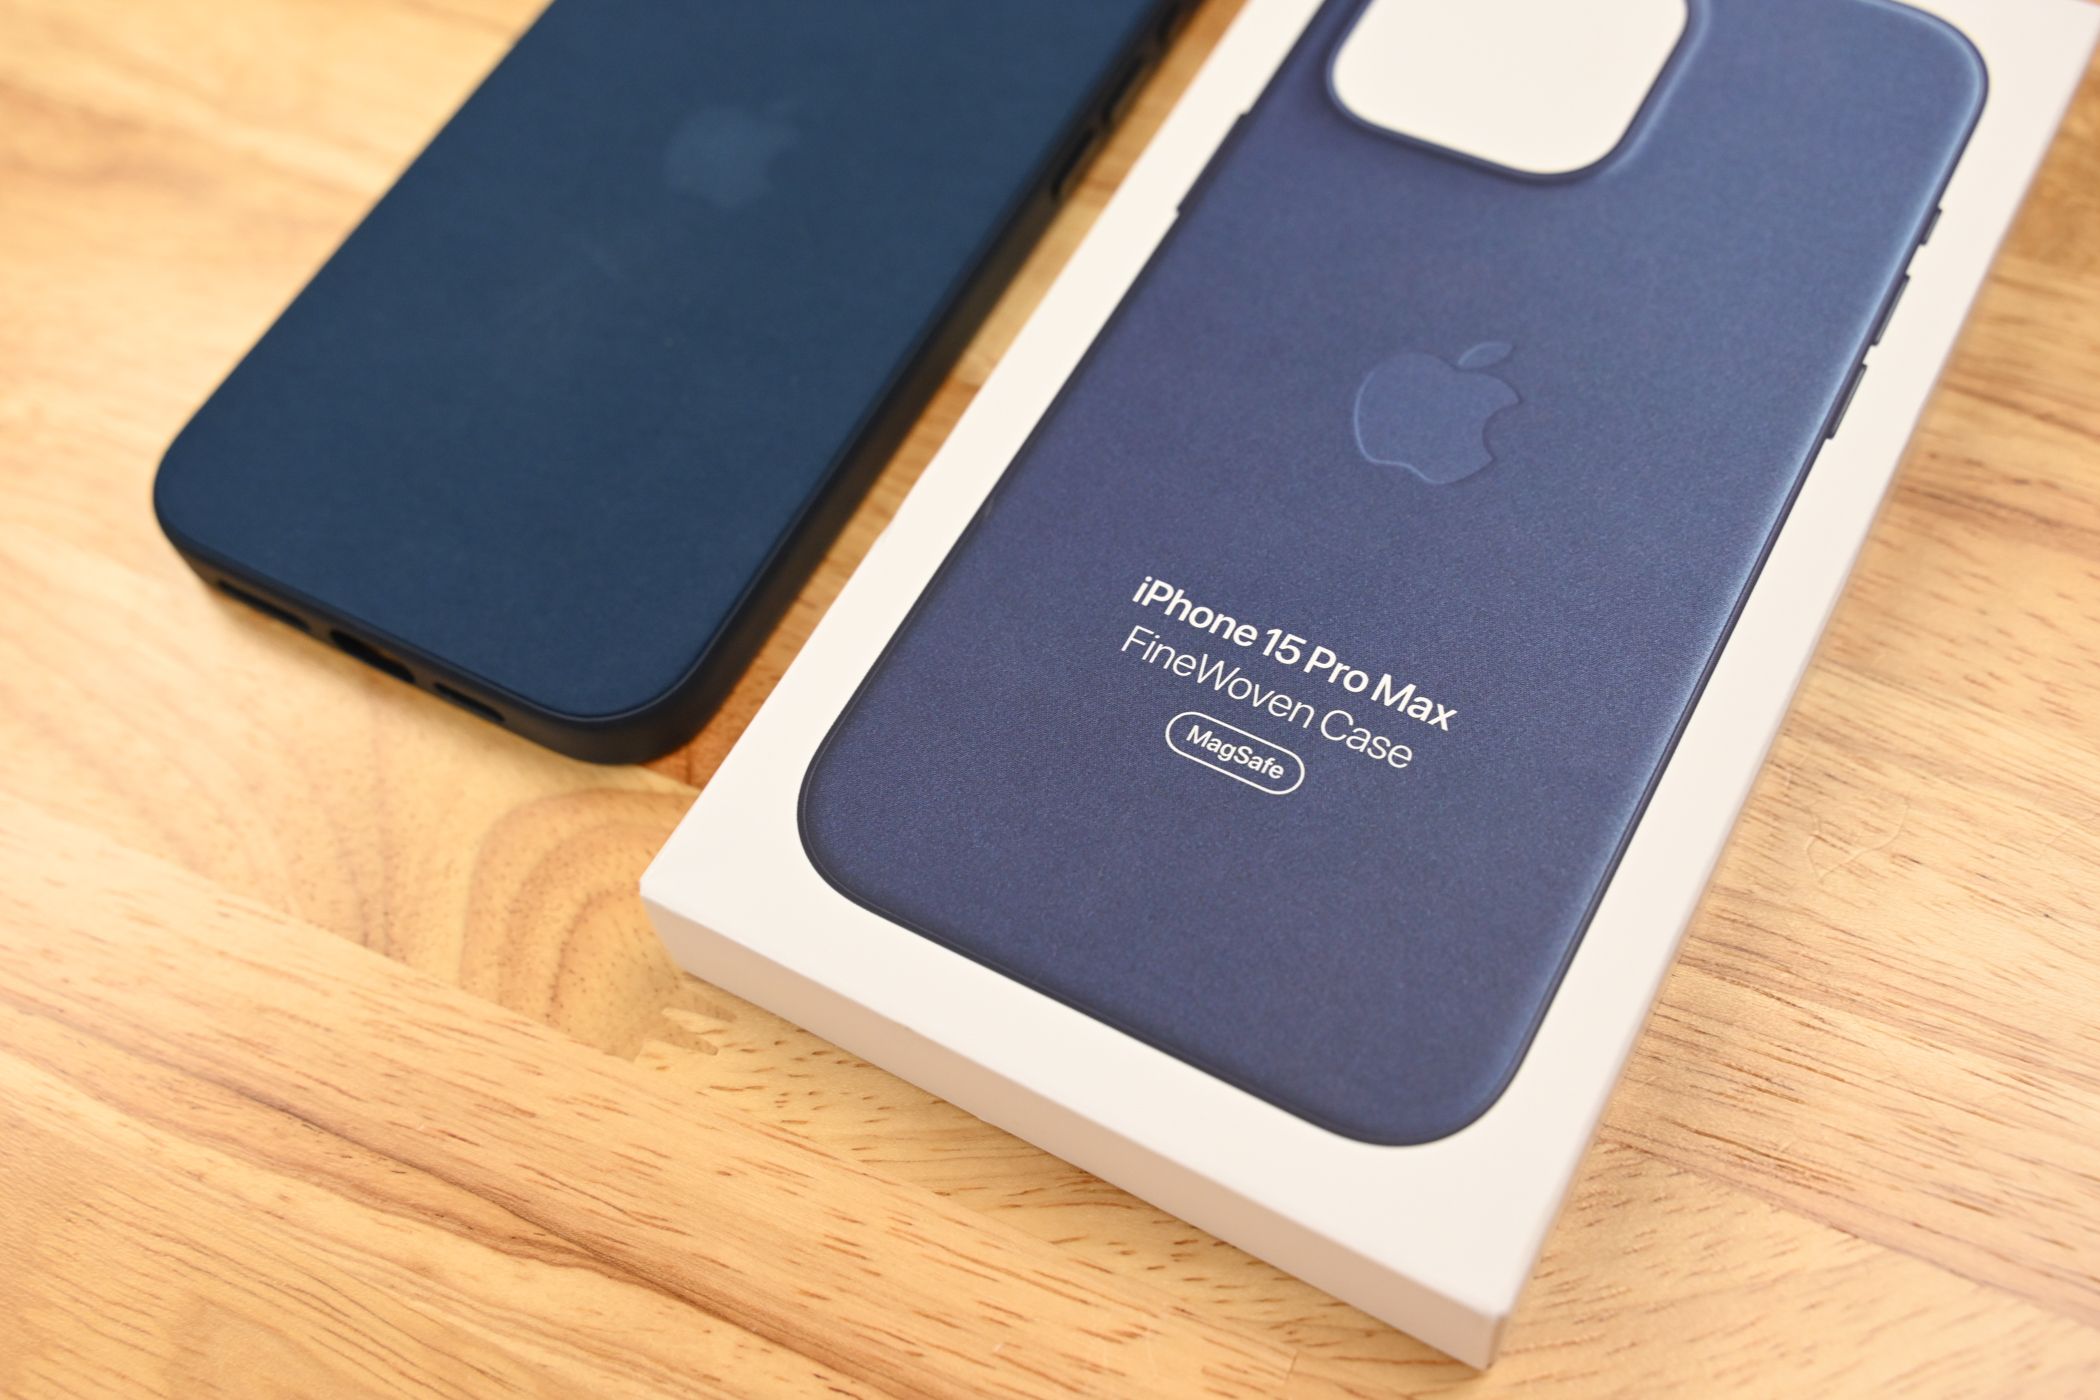 Hands-on with Spigen's iMac-inspired iPhone 15 case [Review]